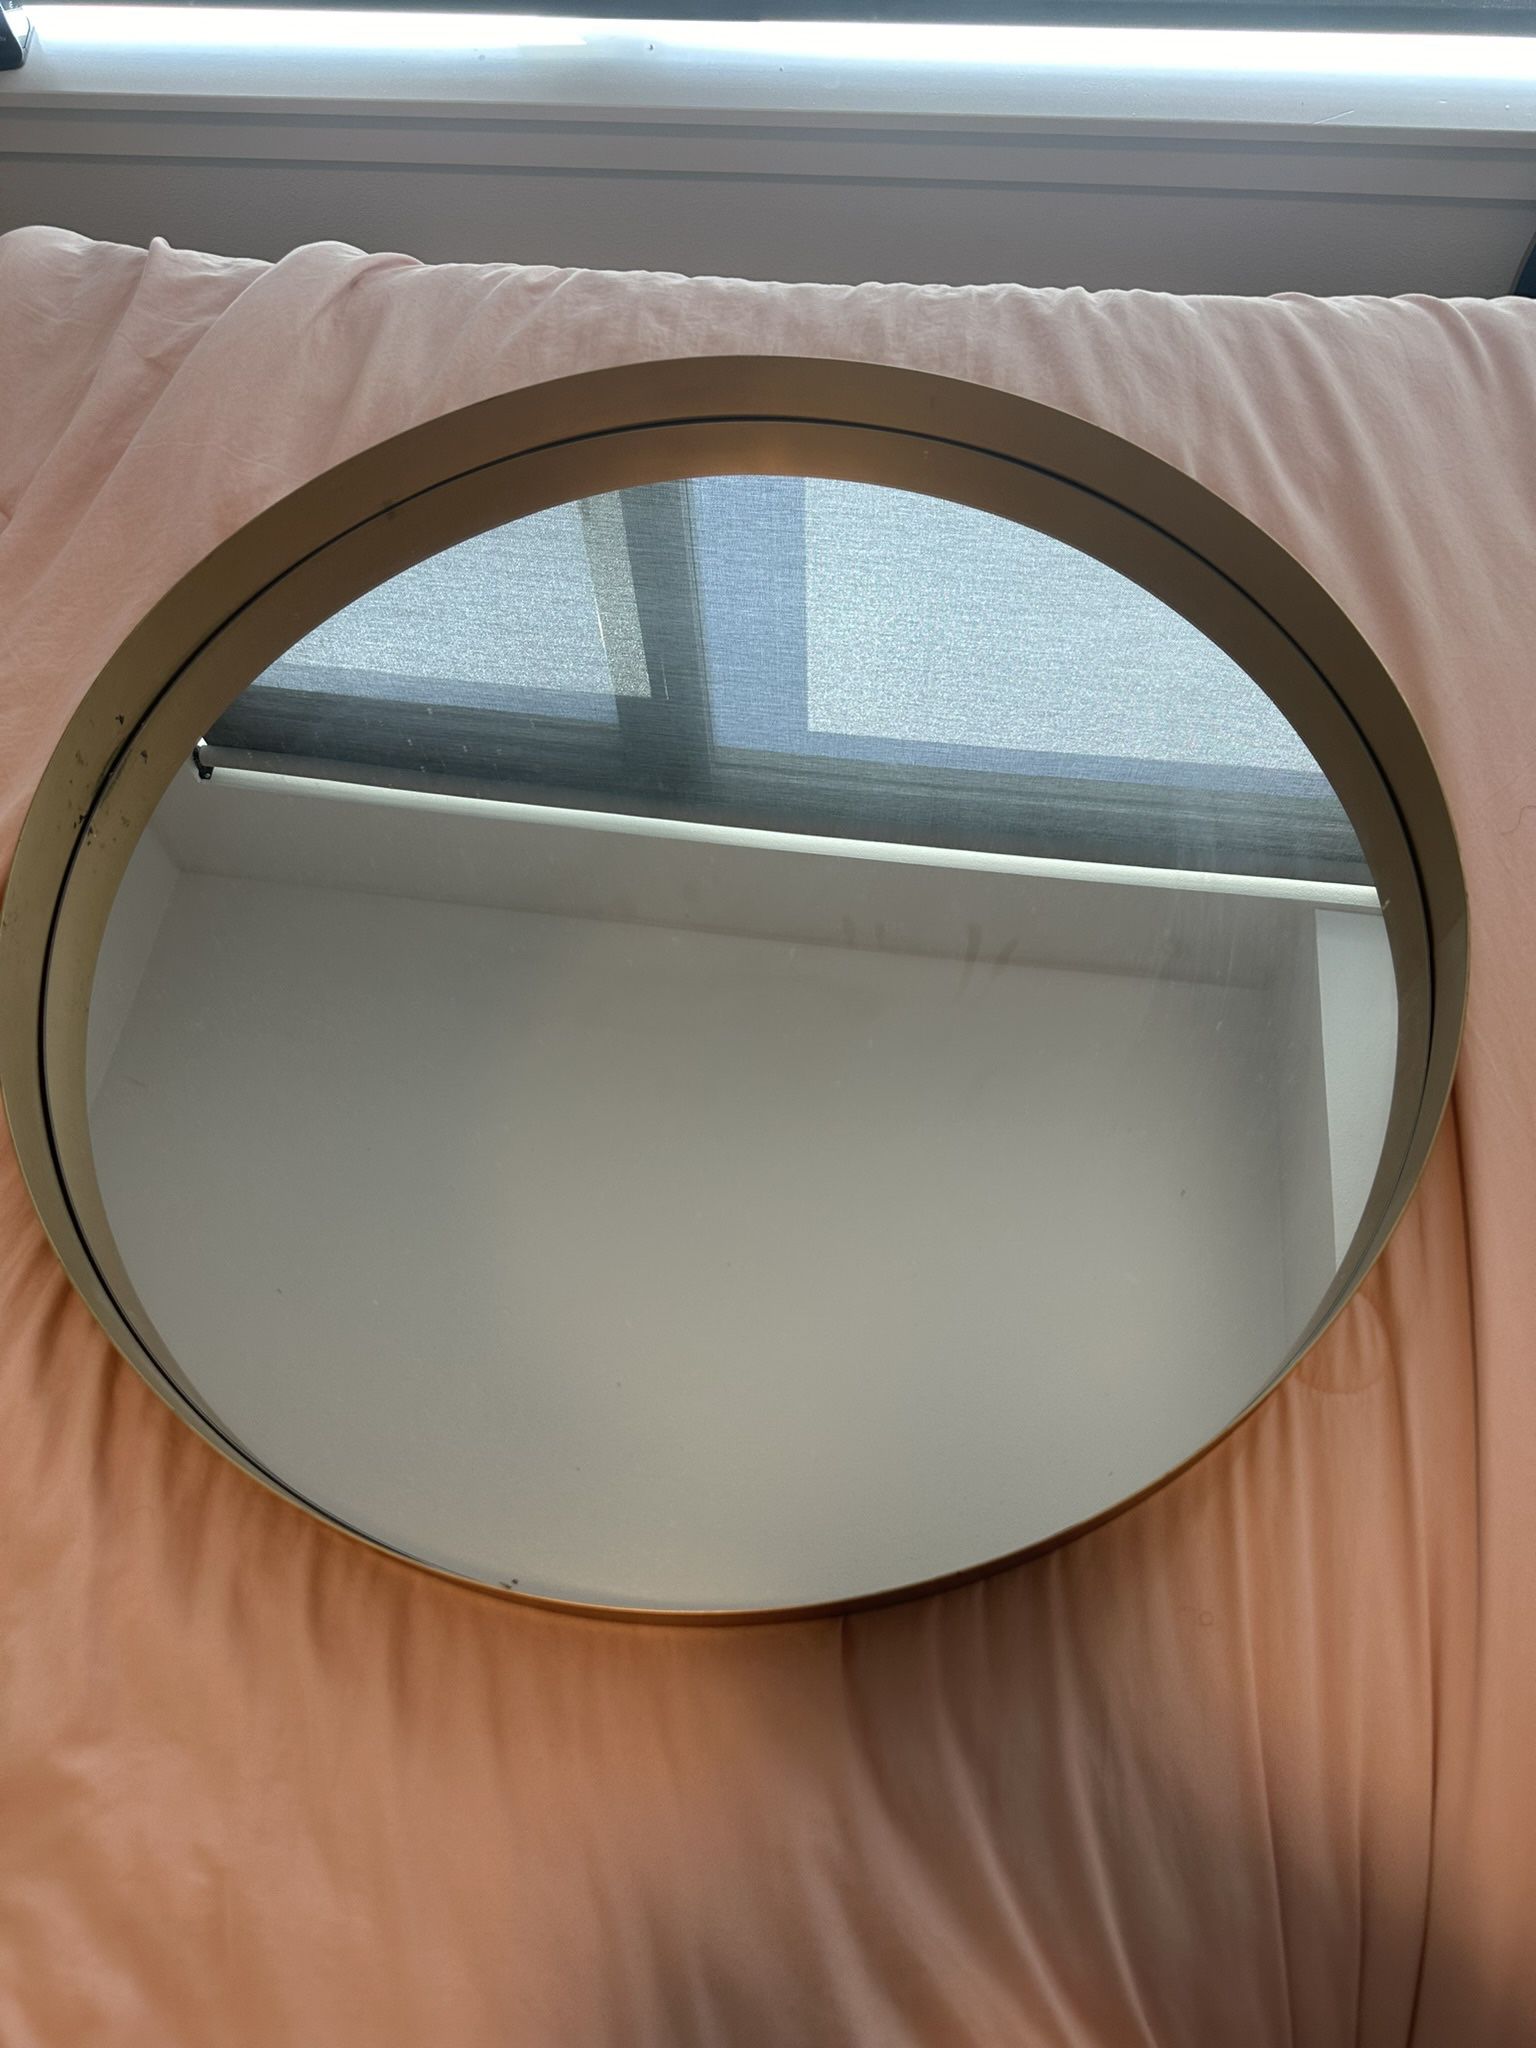 Two Round Gold Accent Mirrors 